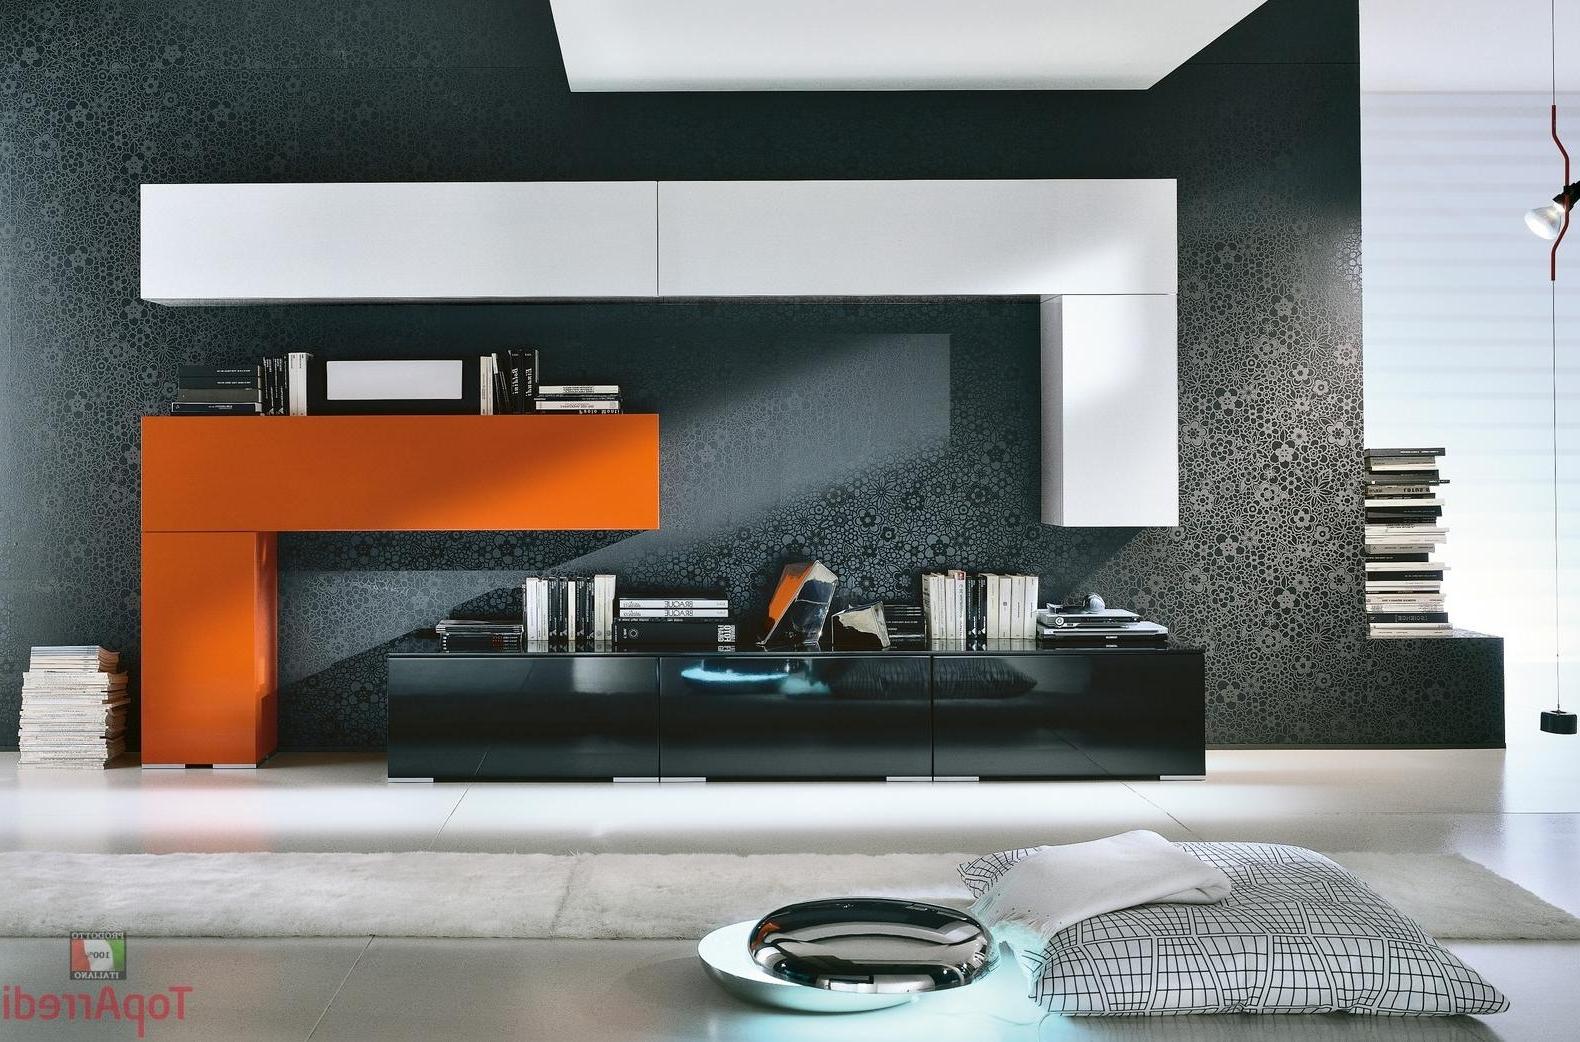 Modern Interior Design With Black Wall And Storage Book With Single Pillow Interior Design